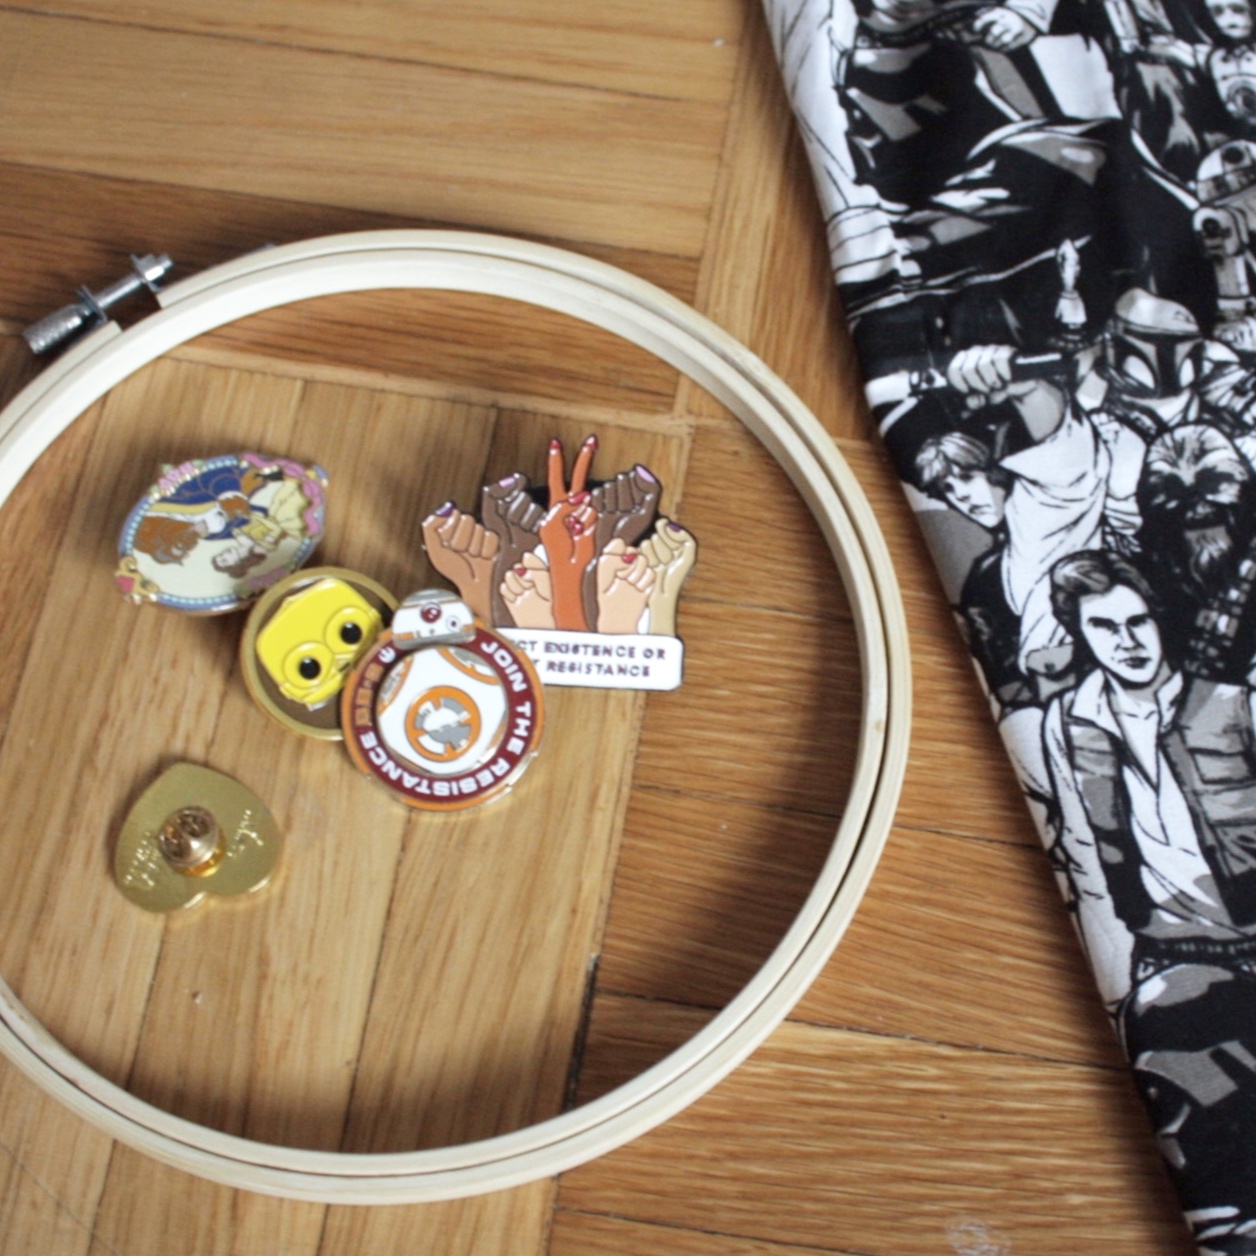 Embroidery Hoop Pin Display DIY Project